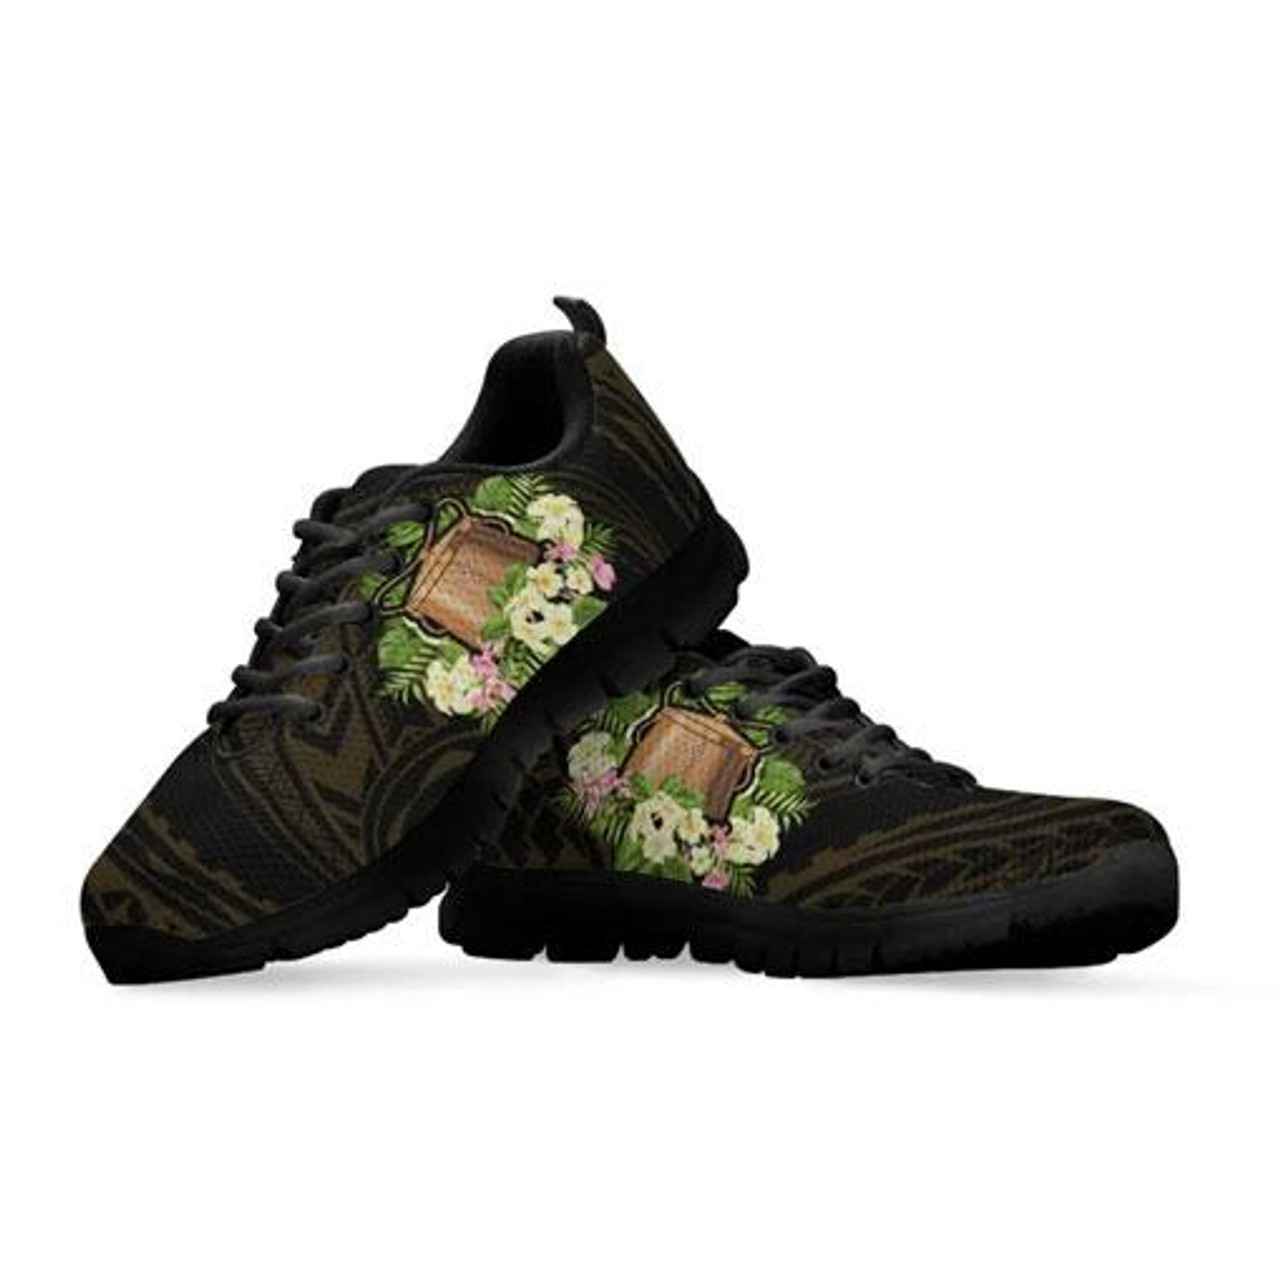 Tokelau Sneakers - Polynesian Gold Patterns Collection 10